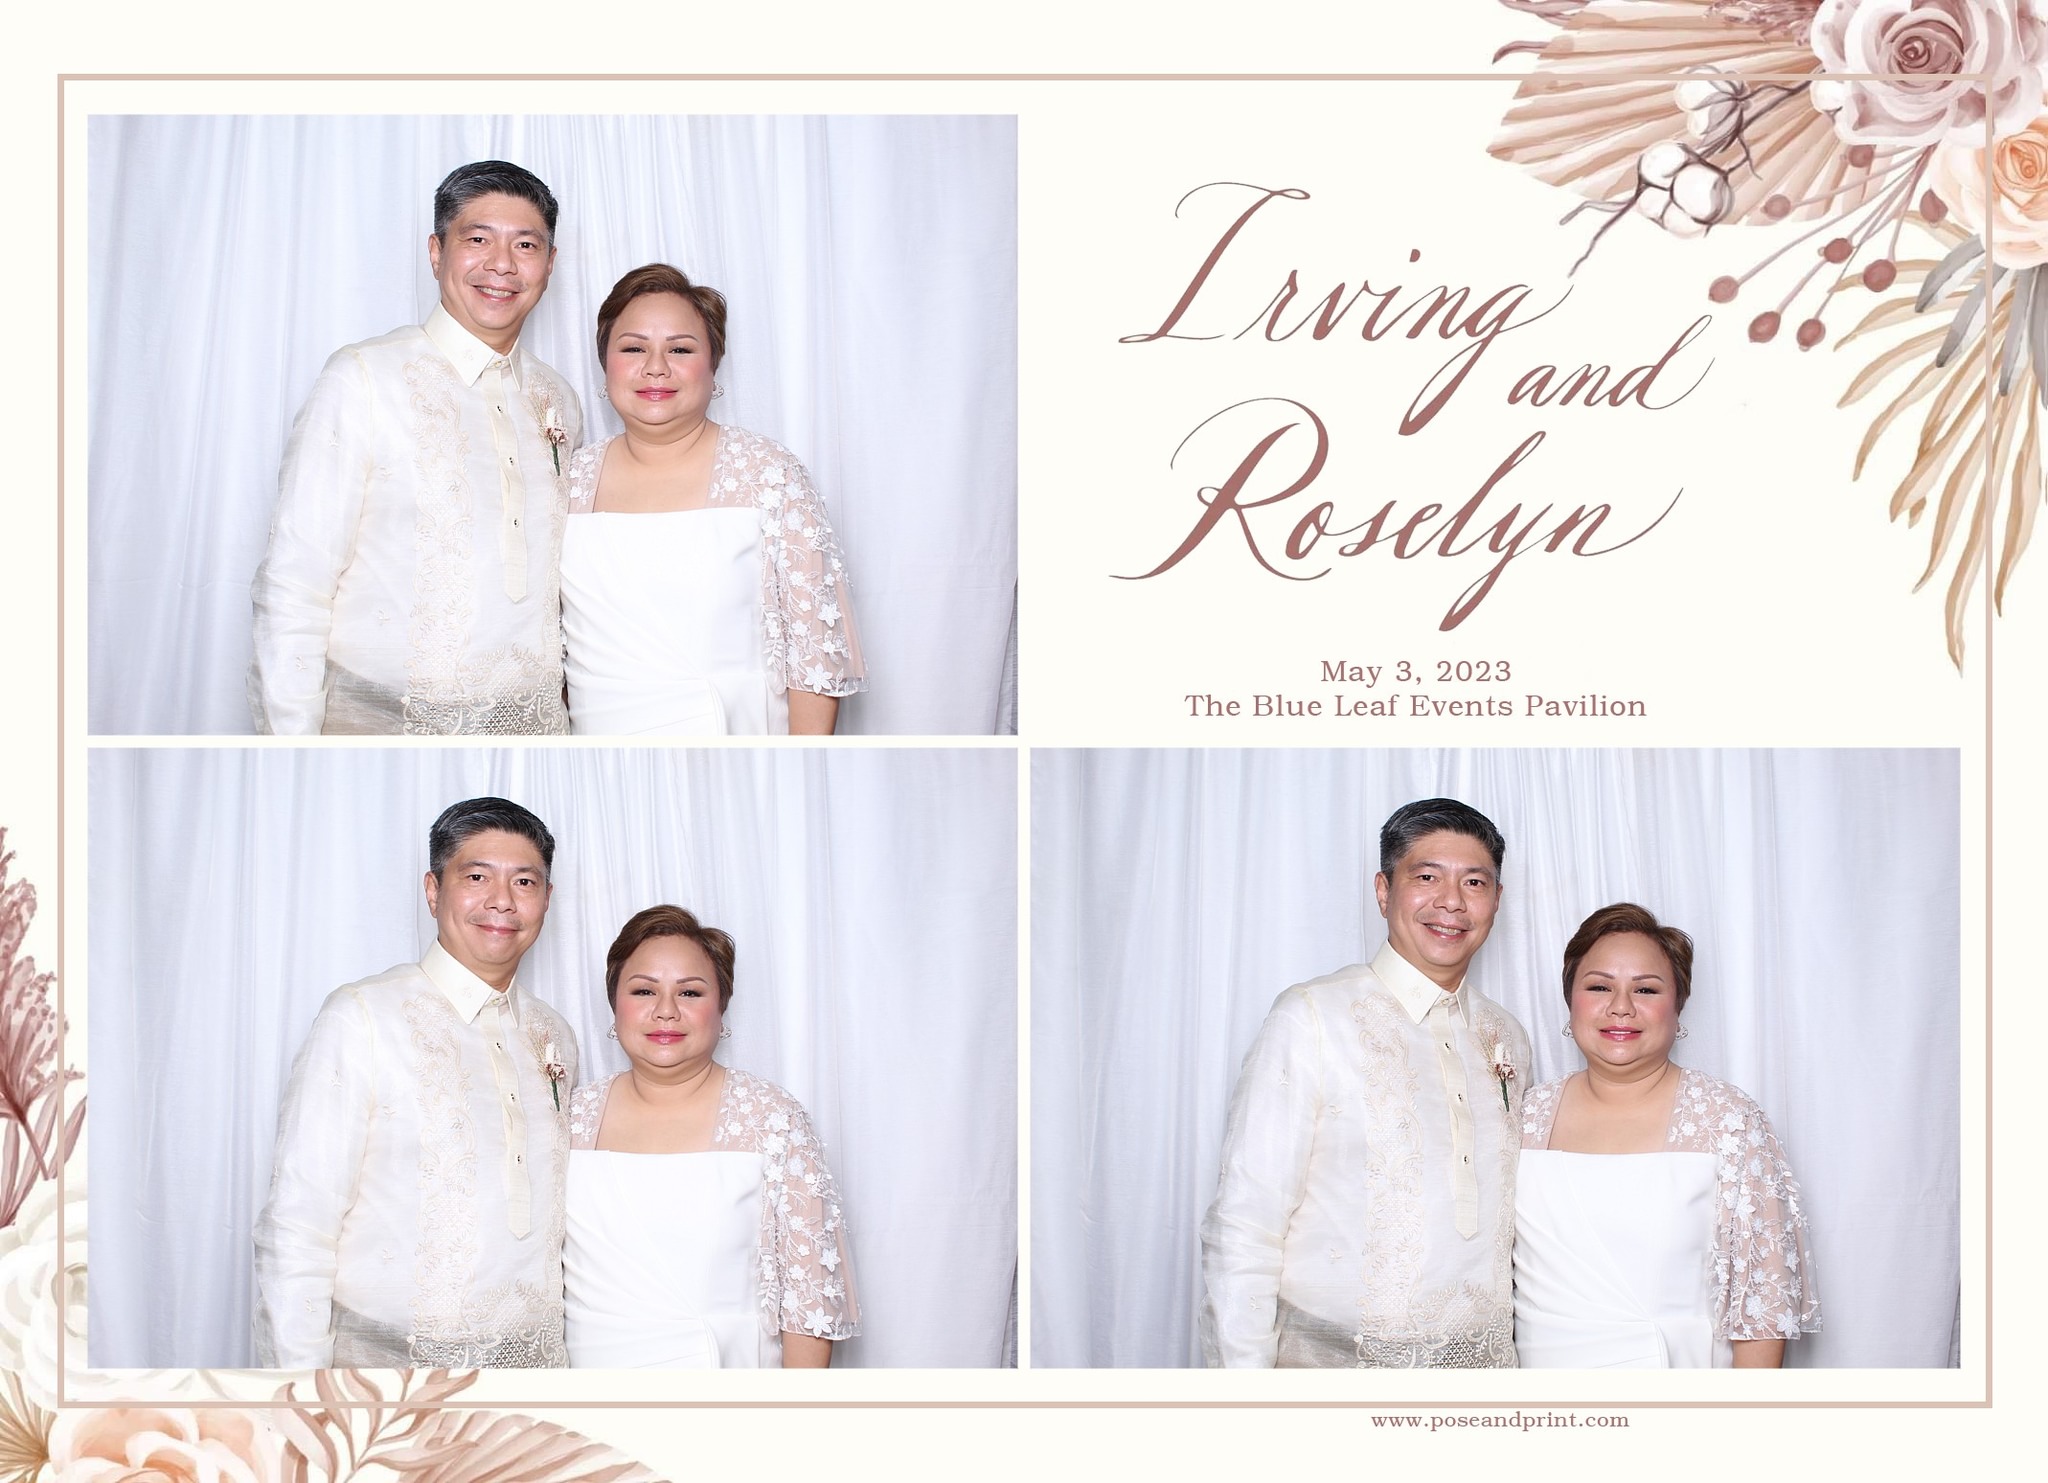 Irving and Roselyn's Wedding